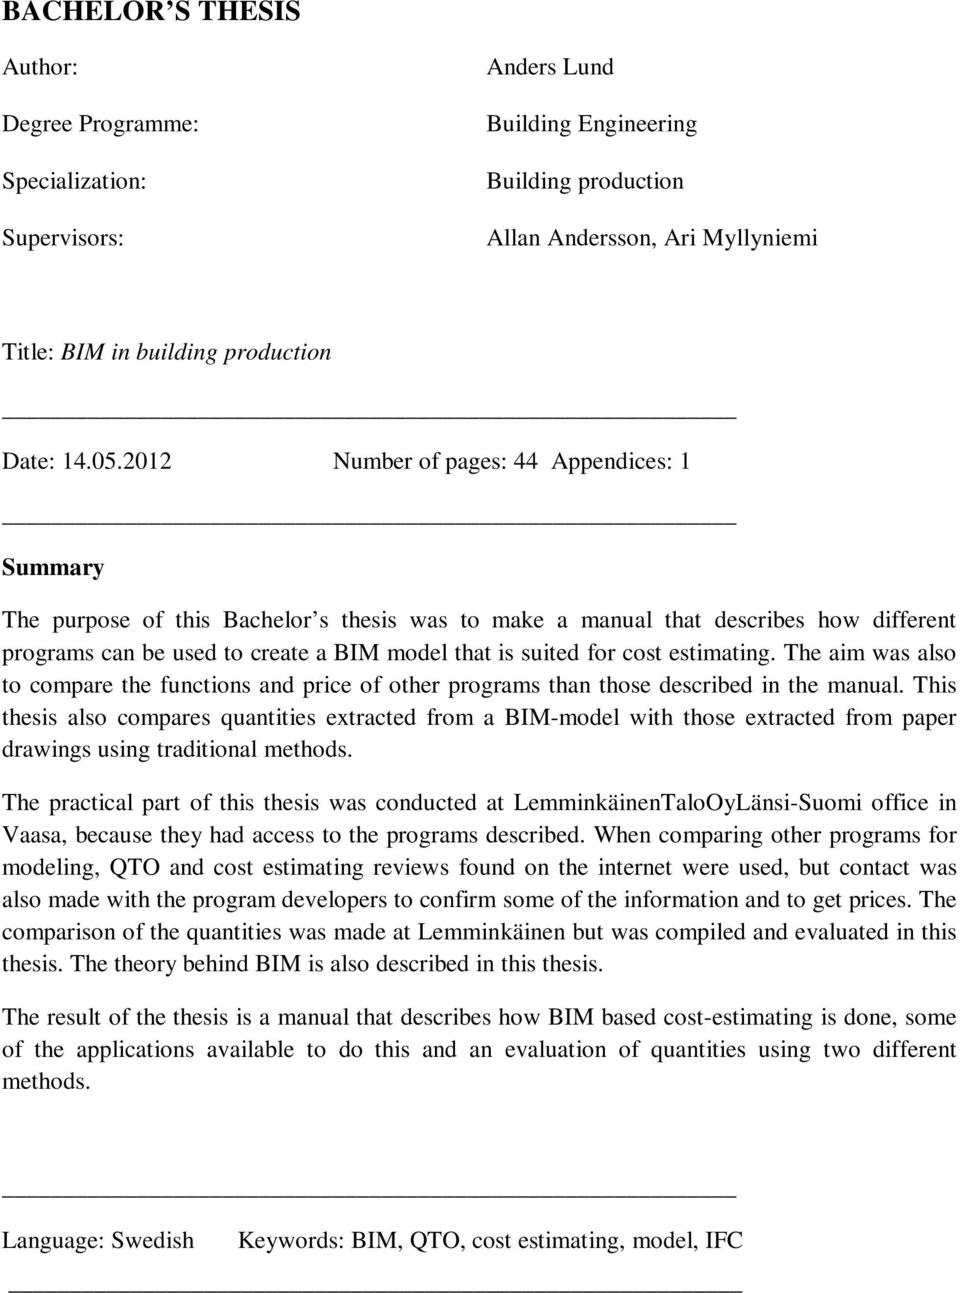 2012 Number of pages: 44 Appendices: 1 Summary The purpose of this Bachelor s thesis was to make a manual that describes how different programs can be used to create a BIM model that is suited for